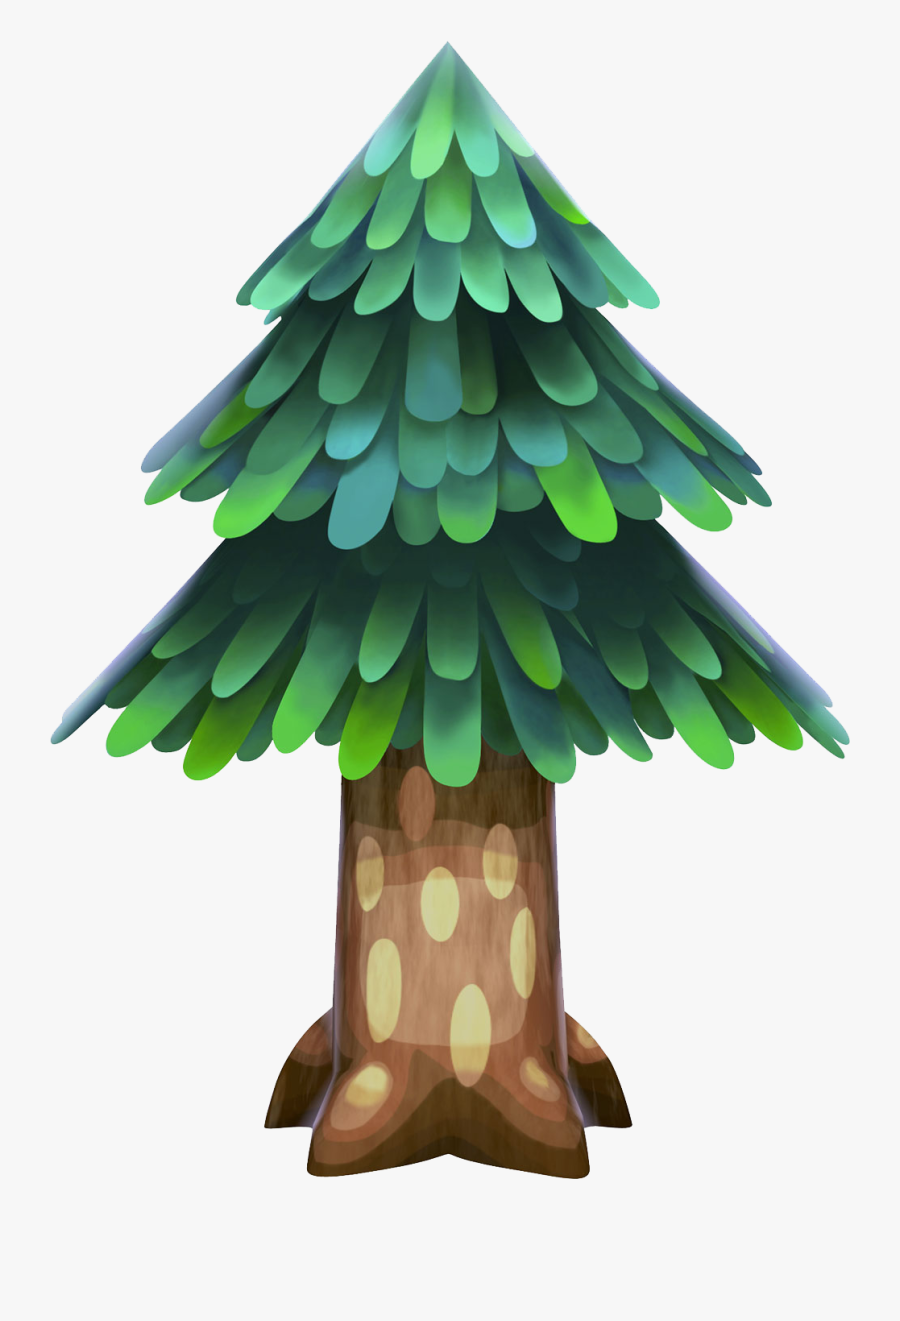 Waterfall Clipart Forest Oregon - Animal Crossing Tree Png, Transparent Clipart